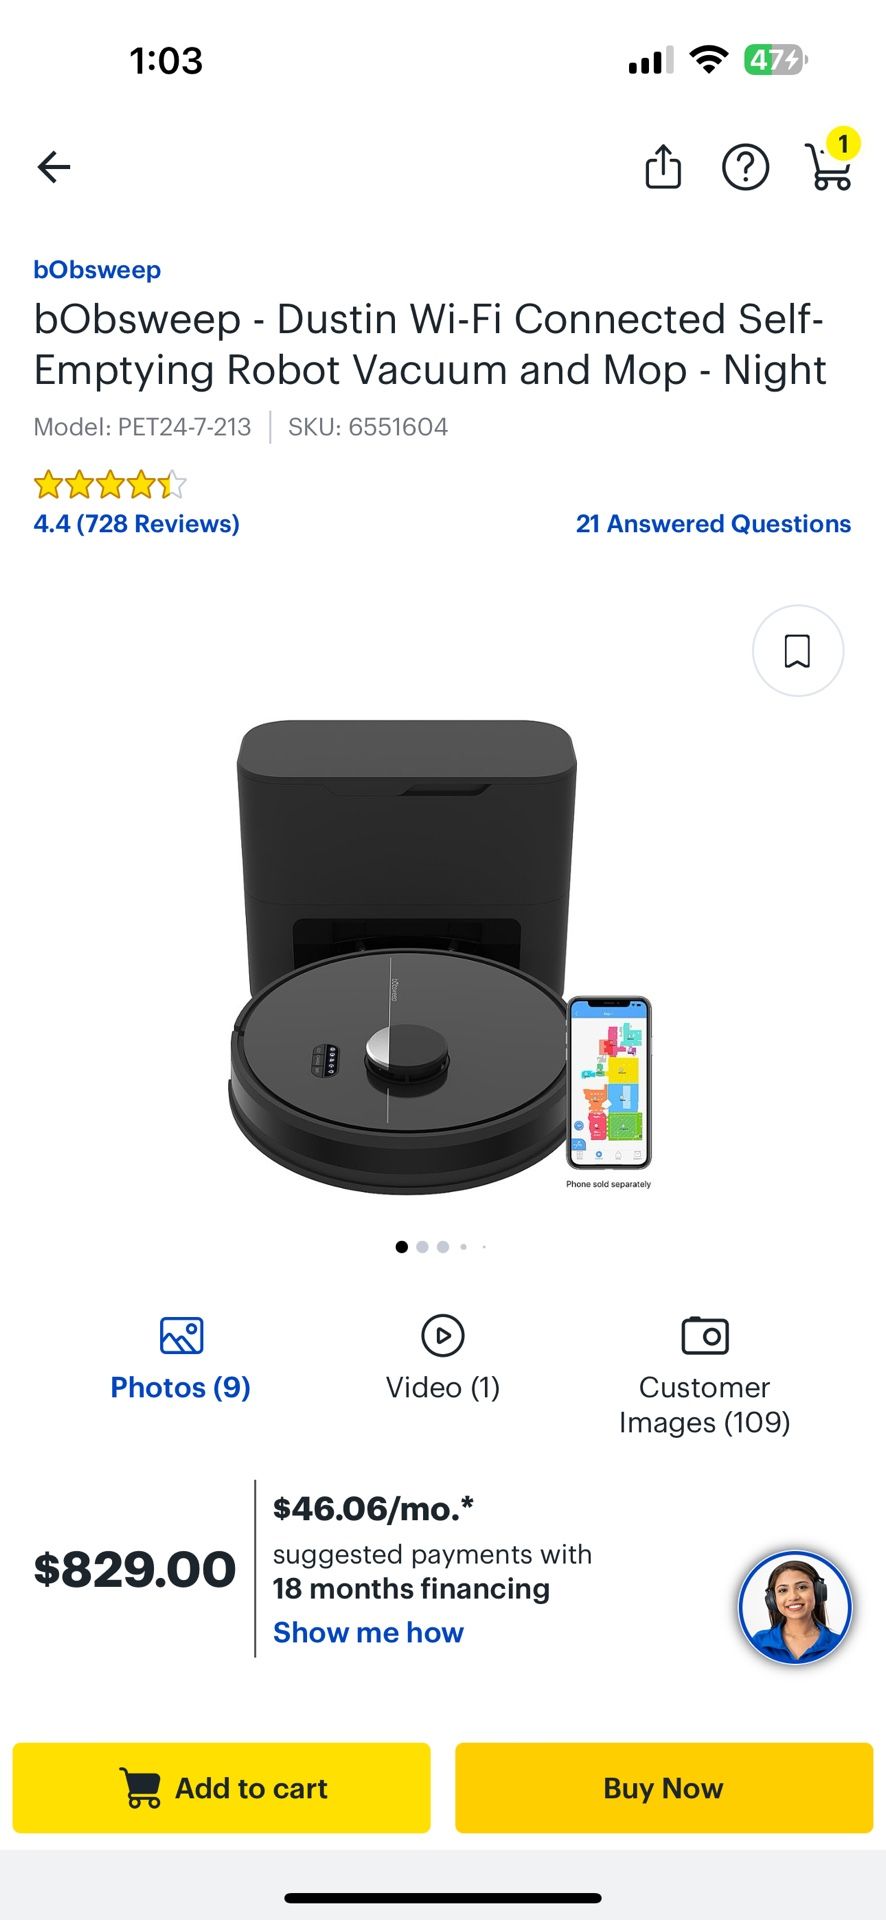 bObsweep - Dustin Wi-Fi Connected Self-Emptying Robot Vacuum and Mop - Night